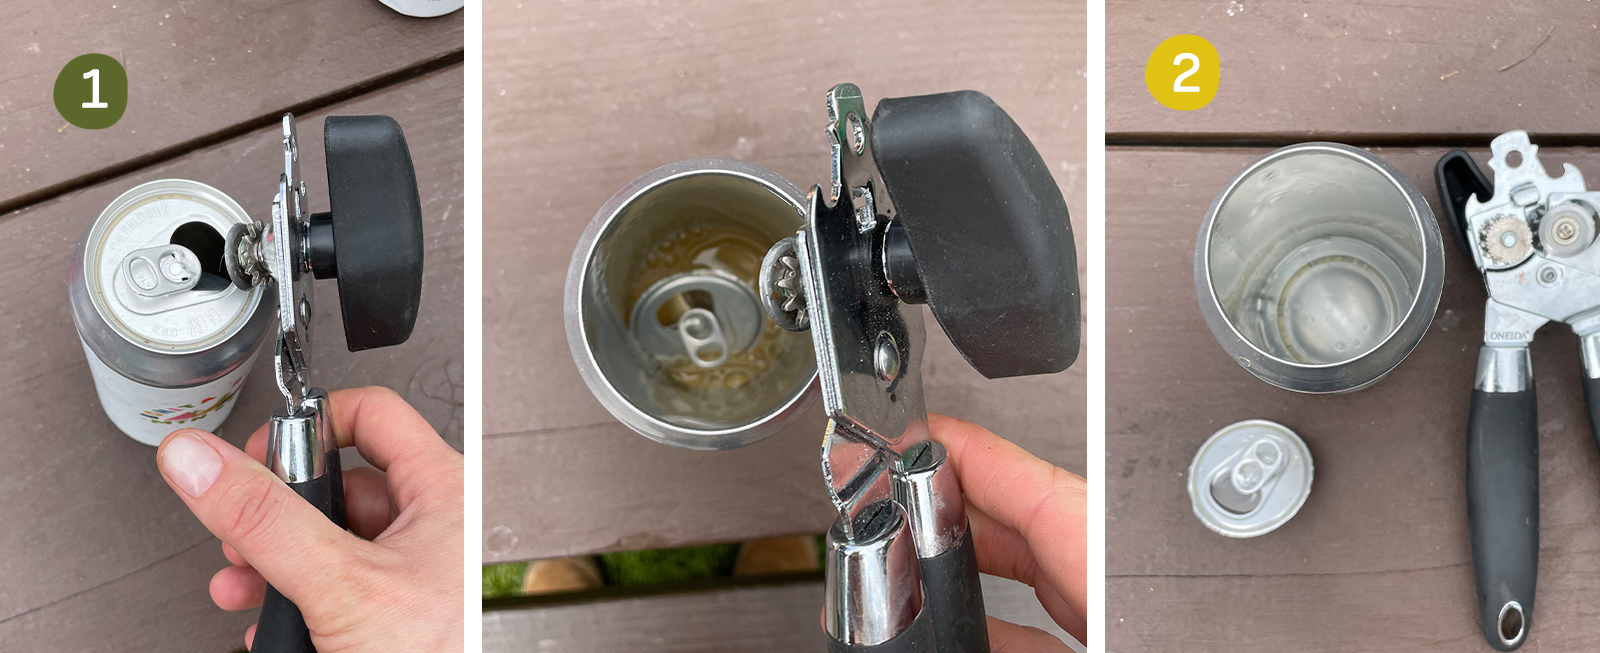 Steps:    Use the can opener to open the empty beer can. Carefully remove the top of the beer can and place it in your recycle bin.   Carefully wash out any leftover beer out of the beer can. Once clean, add water. 